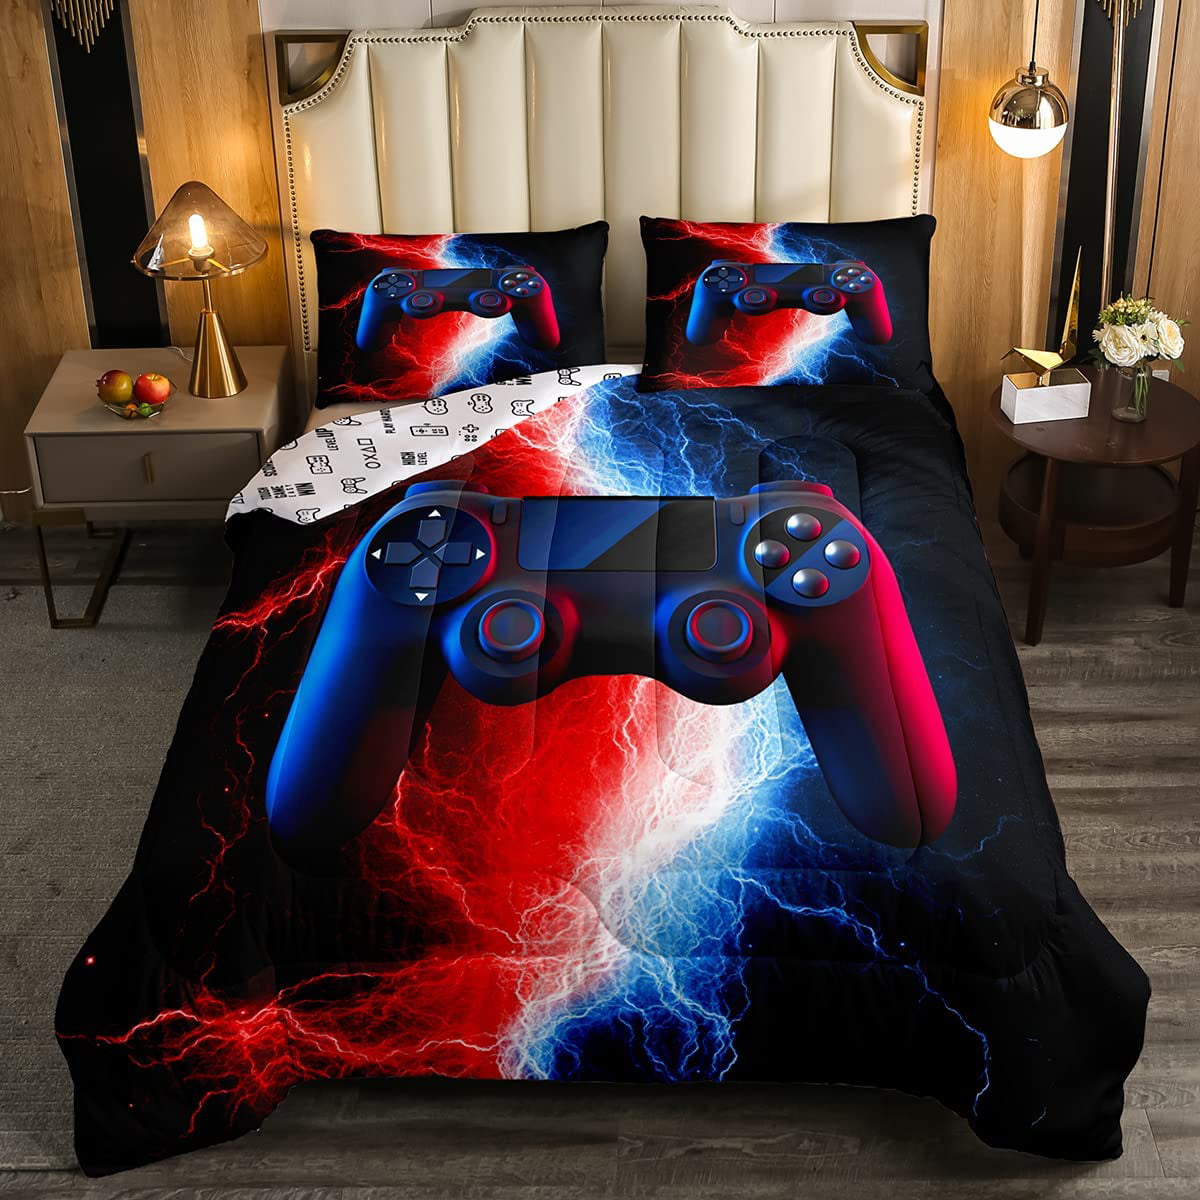 PLAYSTATION TEENS KIDS BOYS LIGHT BLANKET PS4 AND CUSHION SET 2PCS TWIN SIZE 